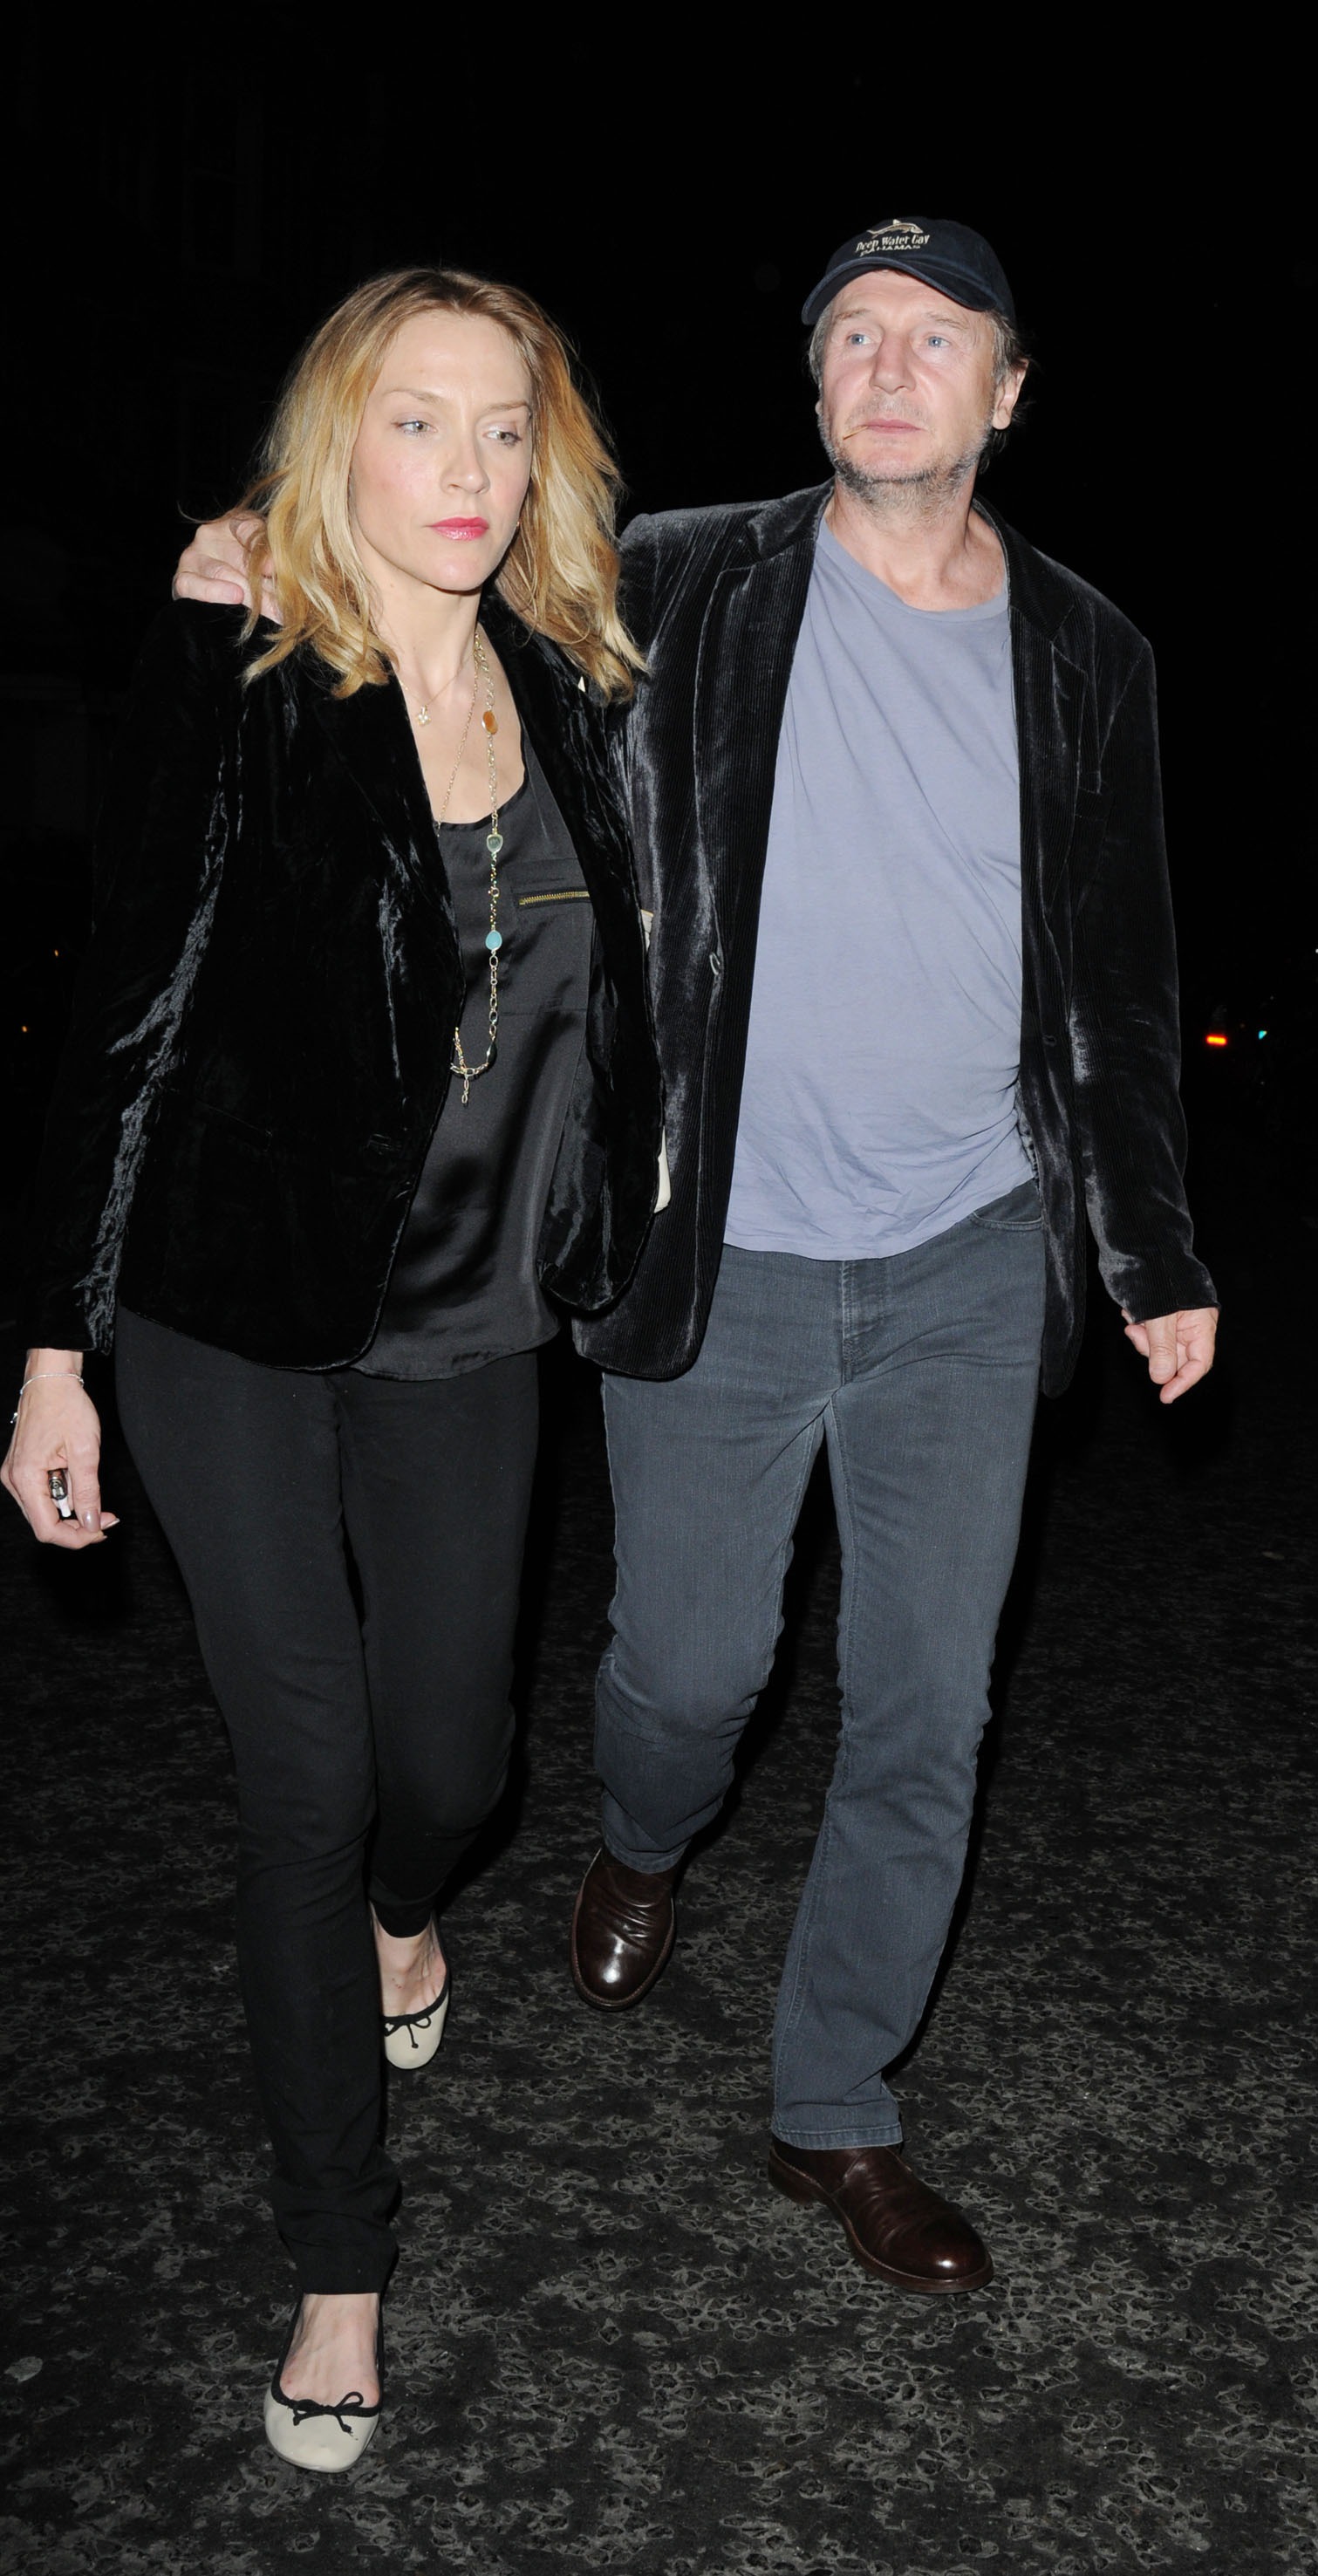 Liam Neeson and Freya St. Johnson at Scotts Restaurant in London on March 30, 2012 | Source: Getty Images